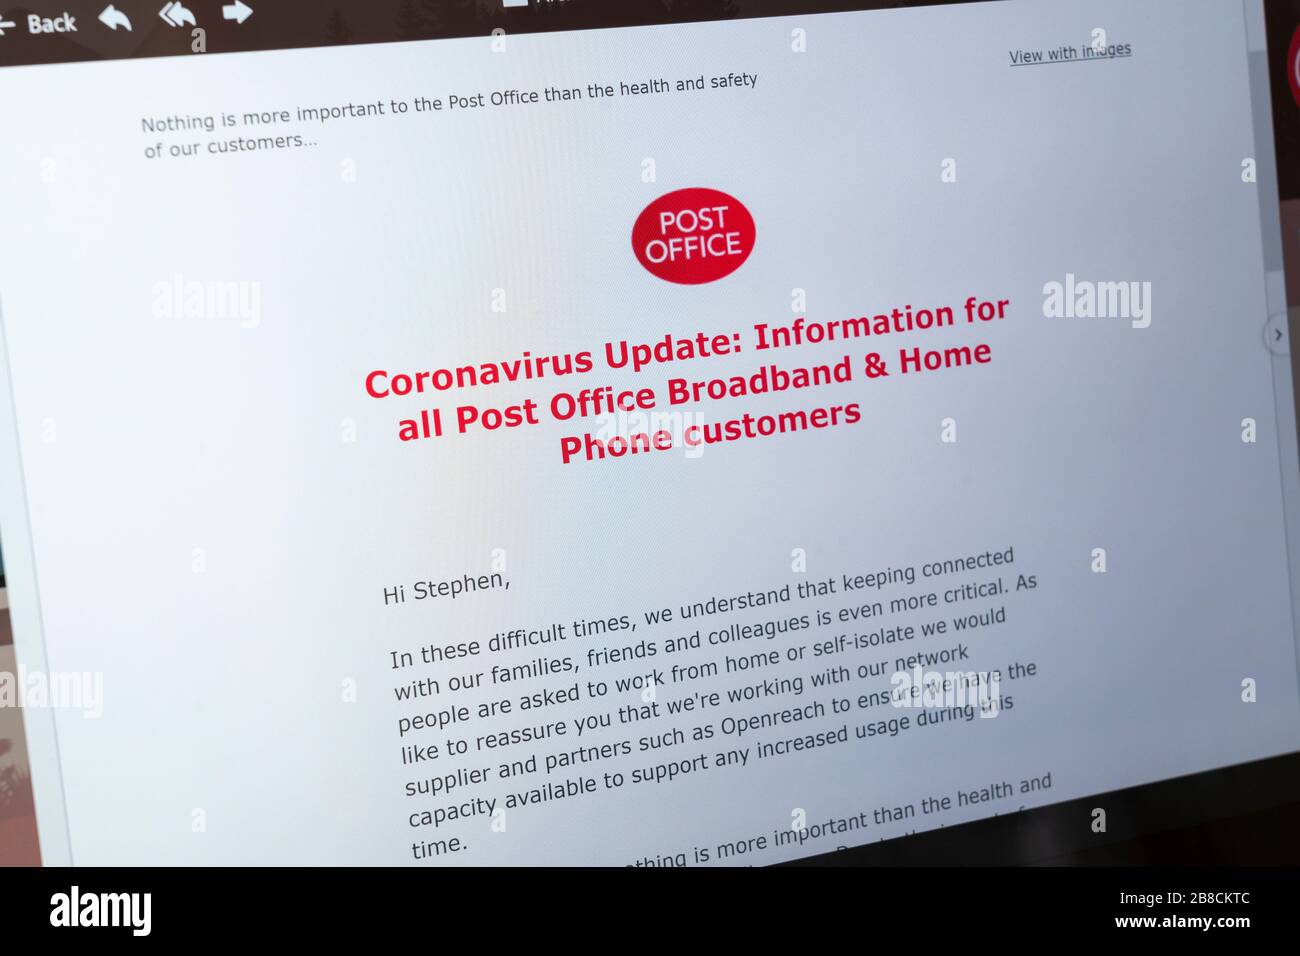 A coronavirus update email from the post office for broadband and home phone customers informing about keeping connected during self isolation, UK Stock Photo